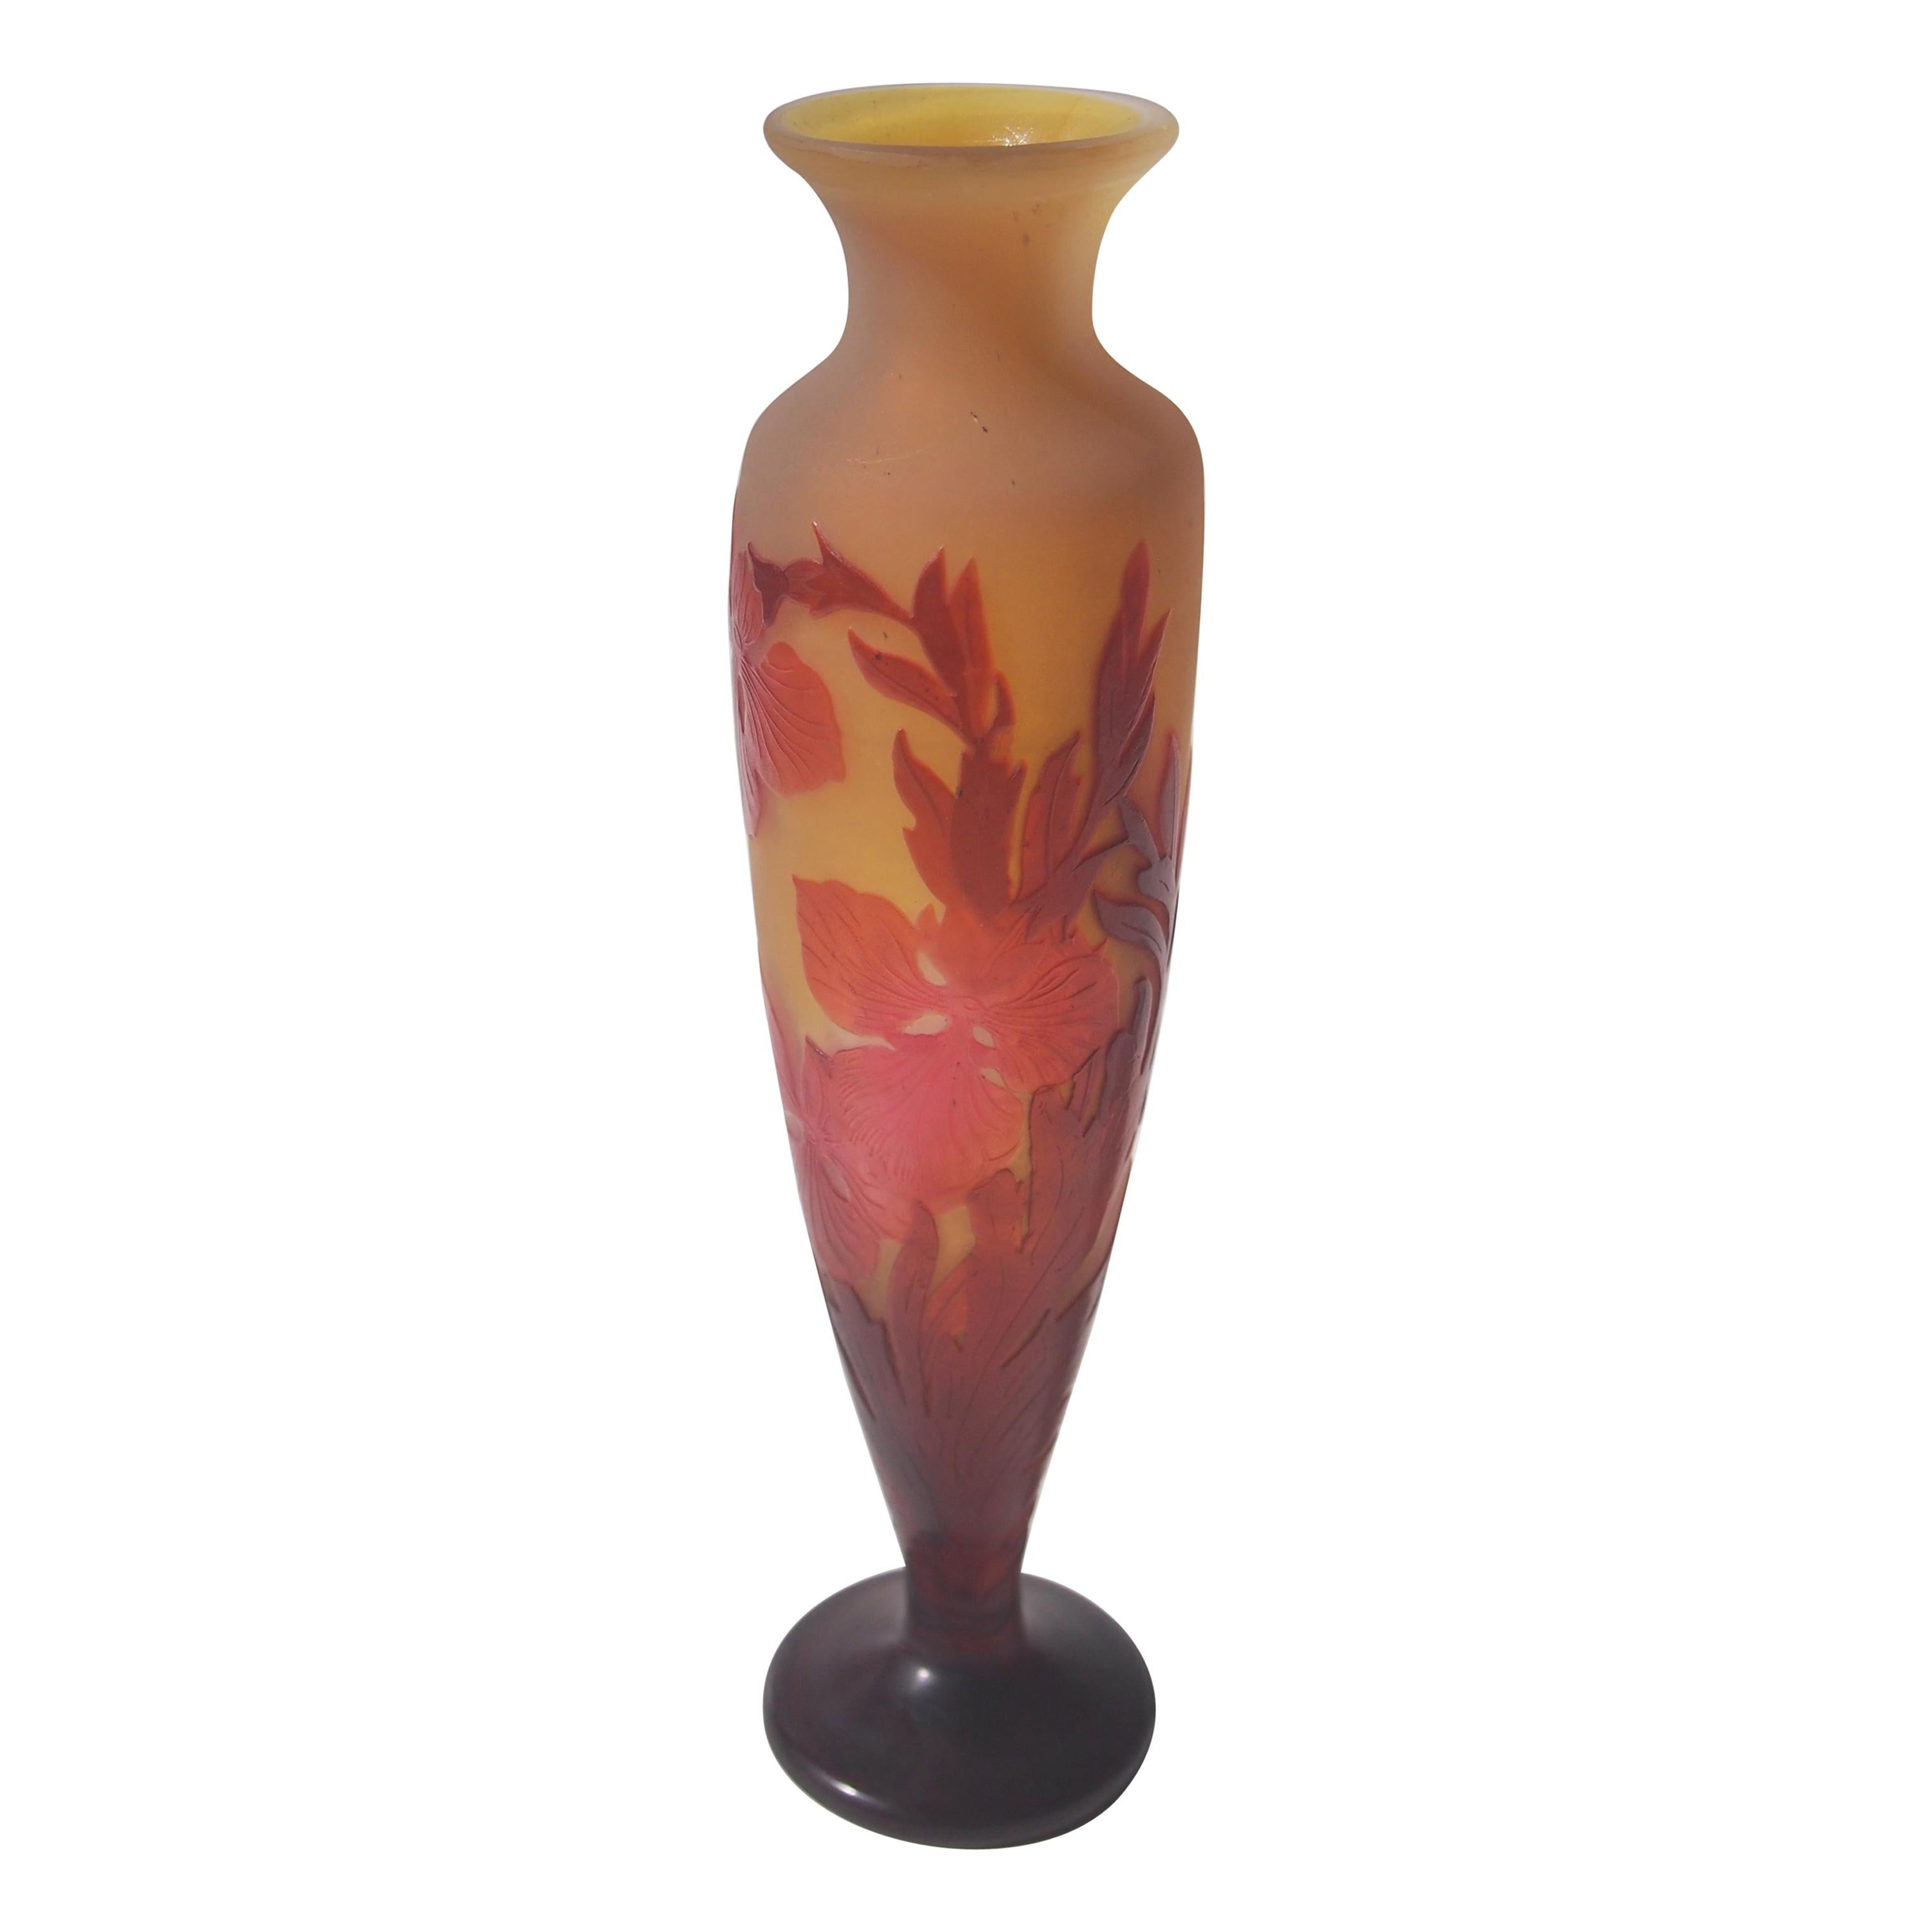 French Art Nouveau Red & Yellow Signed Emile Galle Cameo Glass Vase, circa 1900